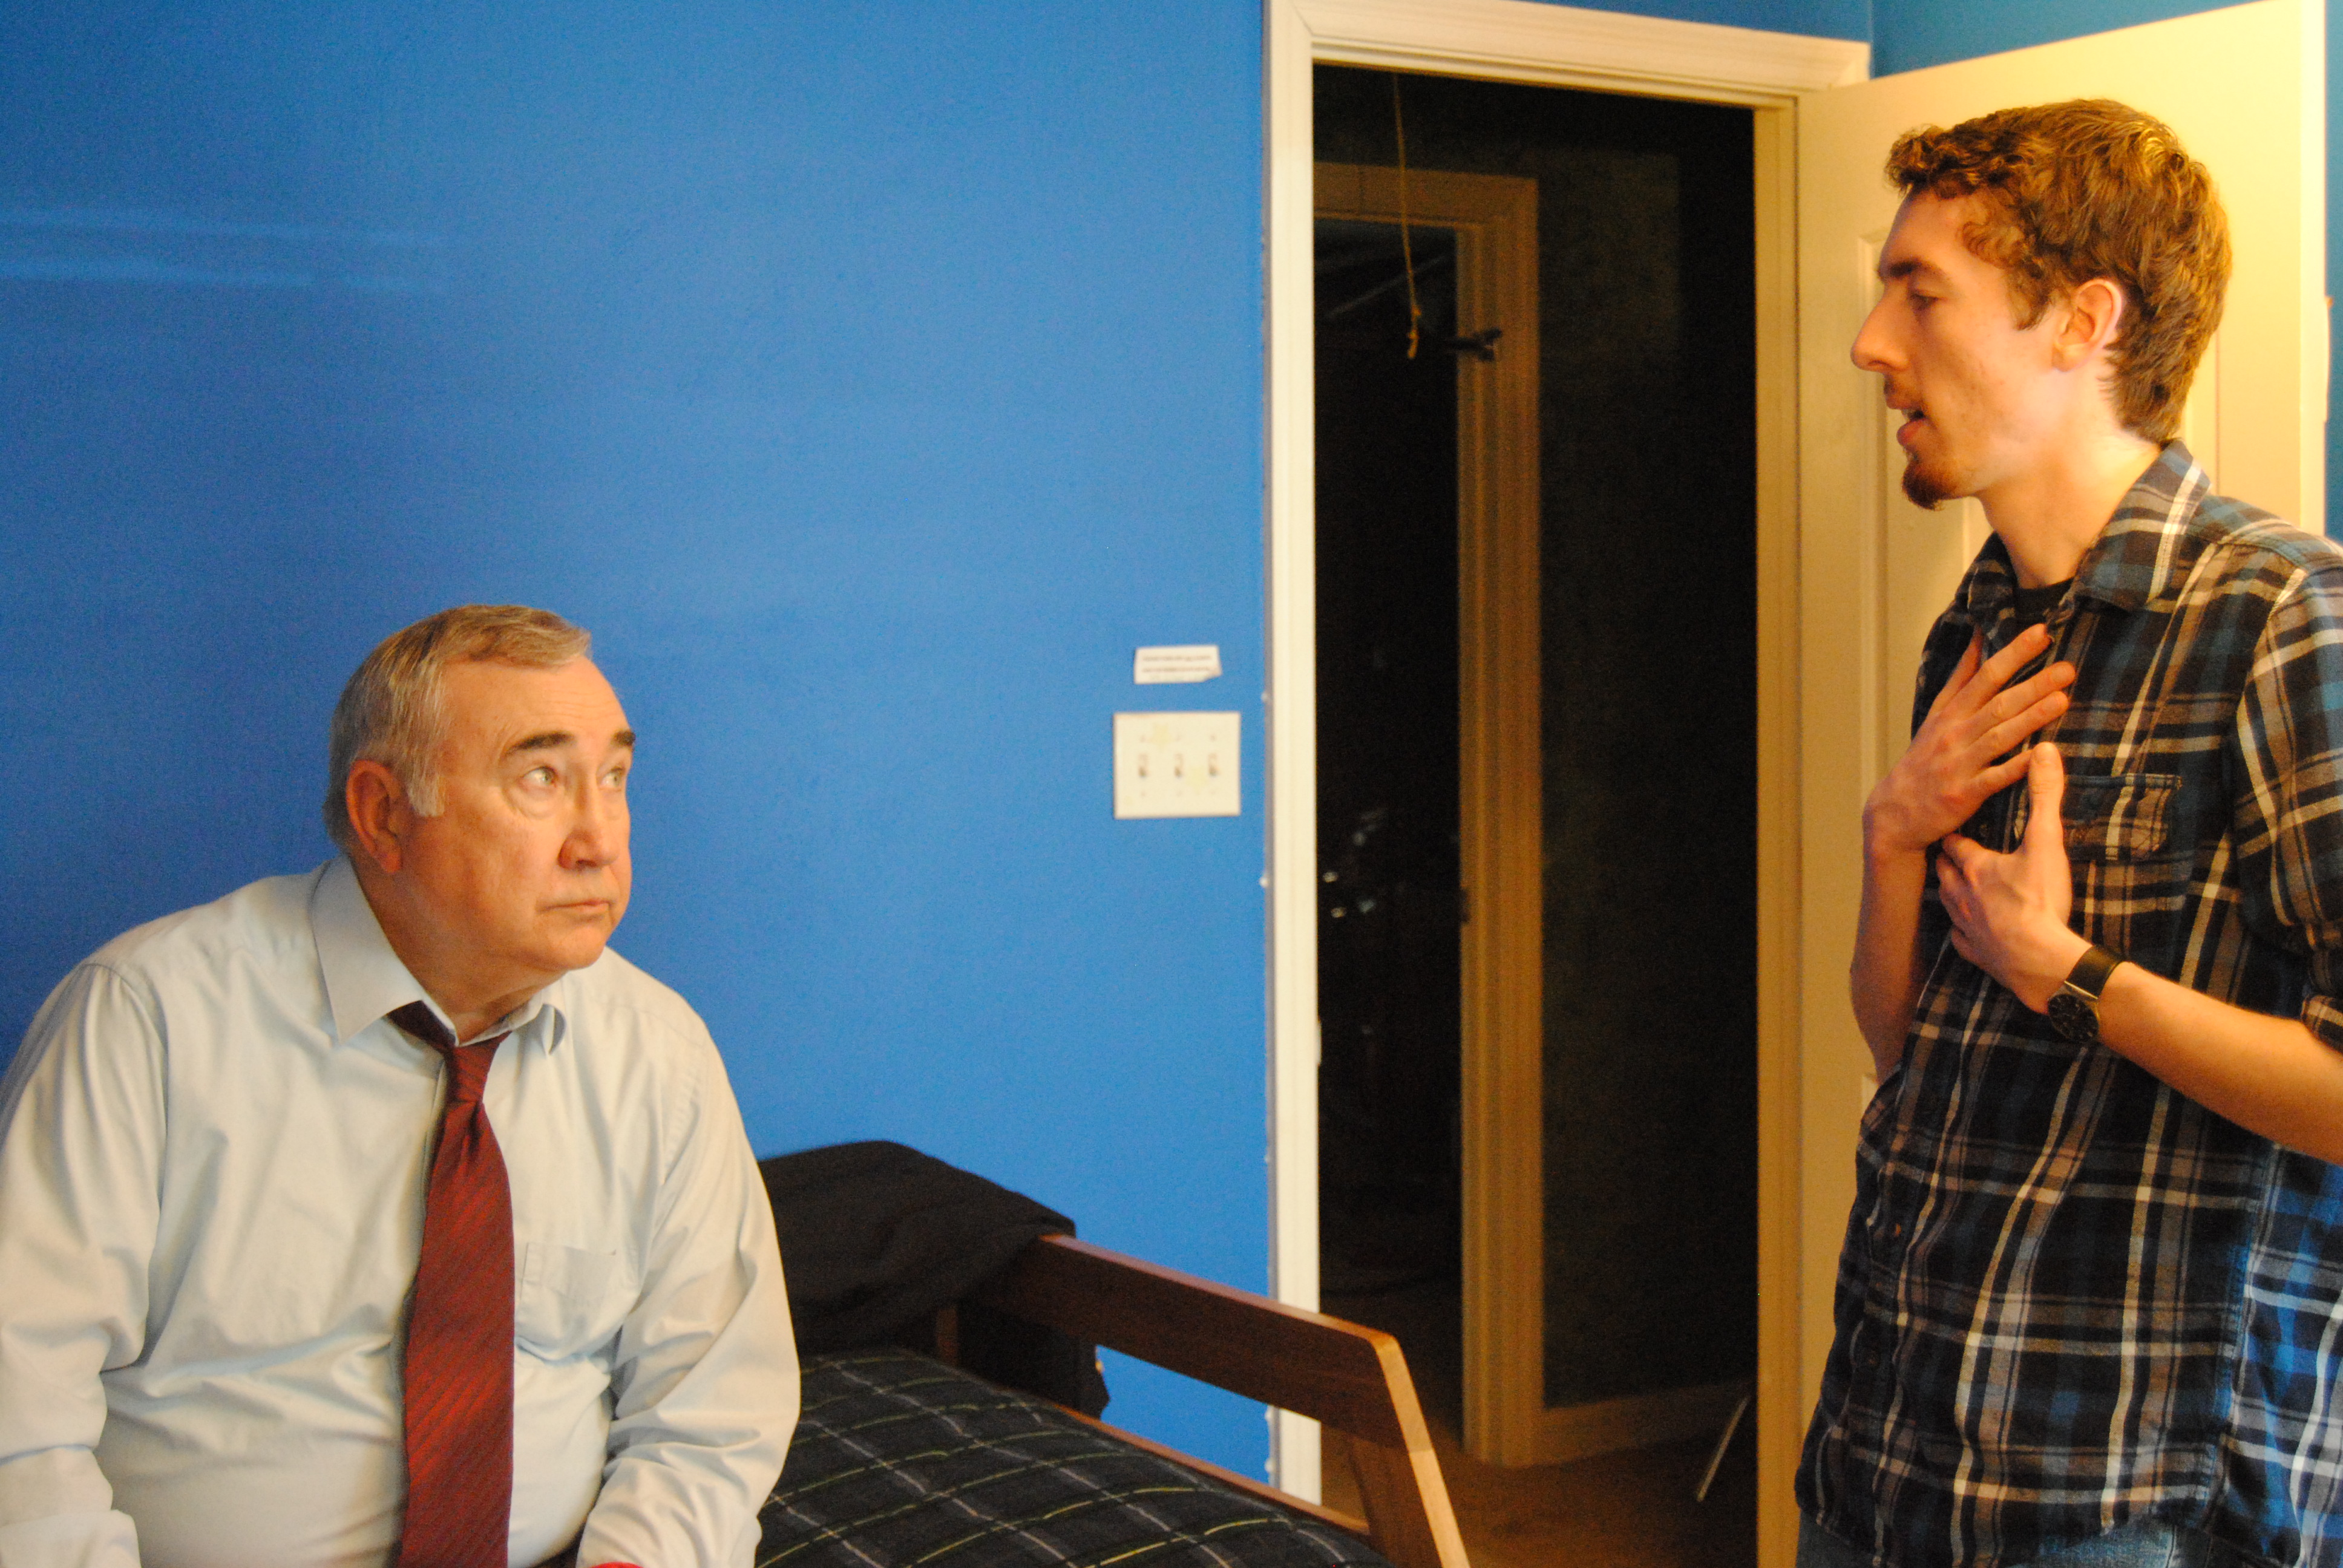 Director Blake Cortright [R] discusses a scene with actor Robert Shepherd [L] on the set of 